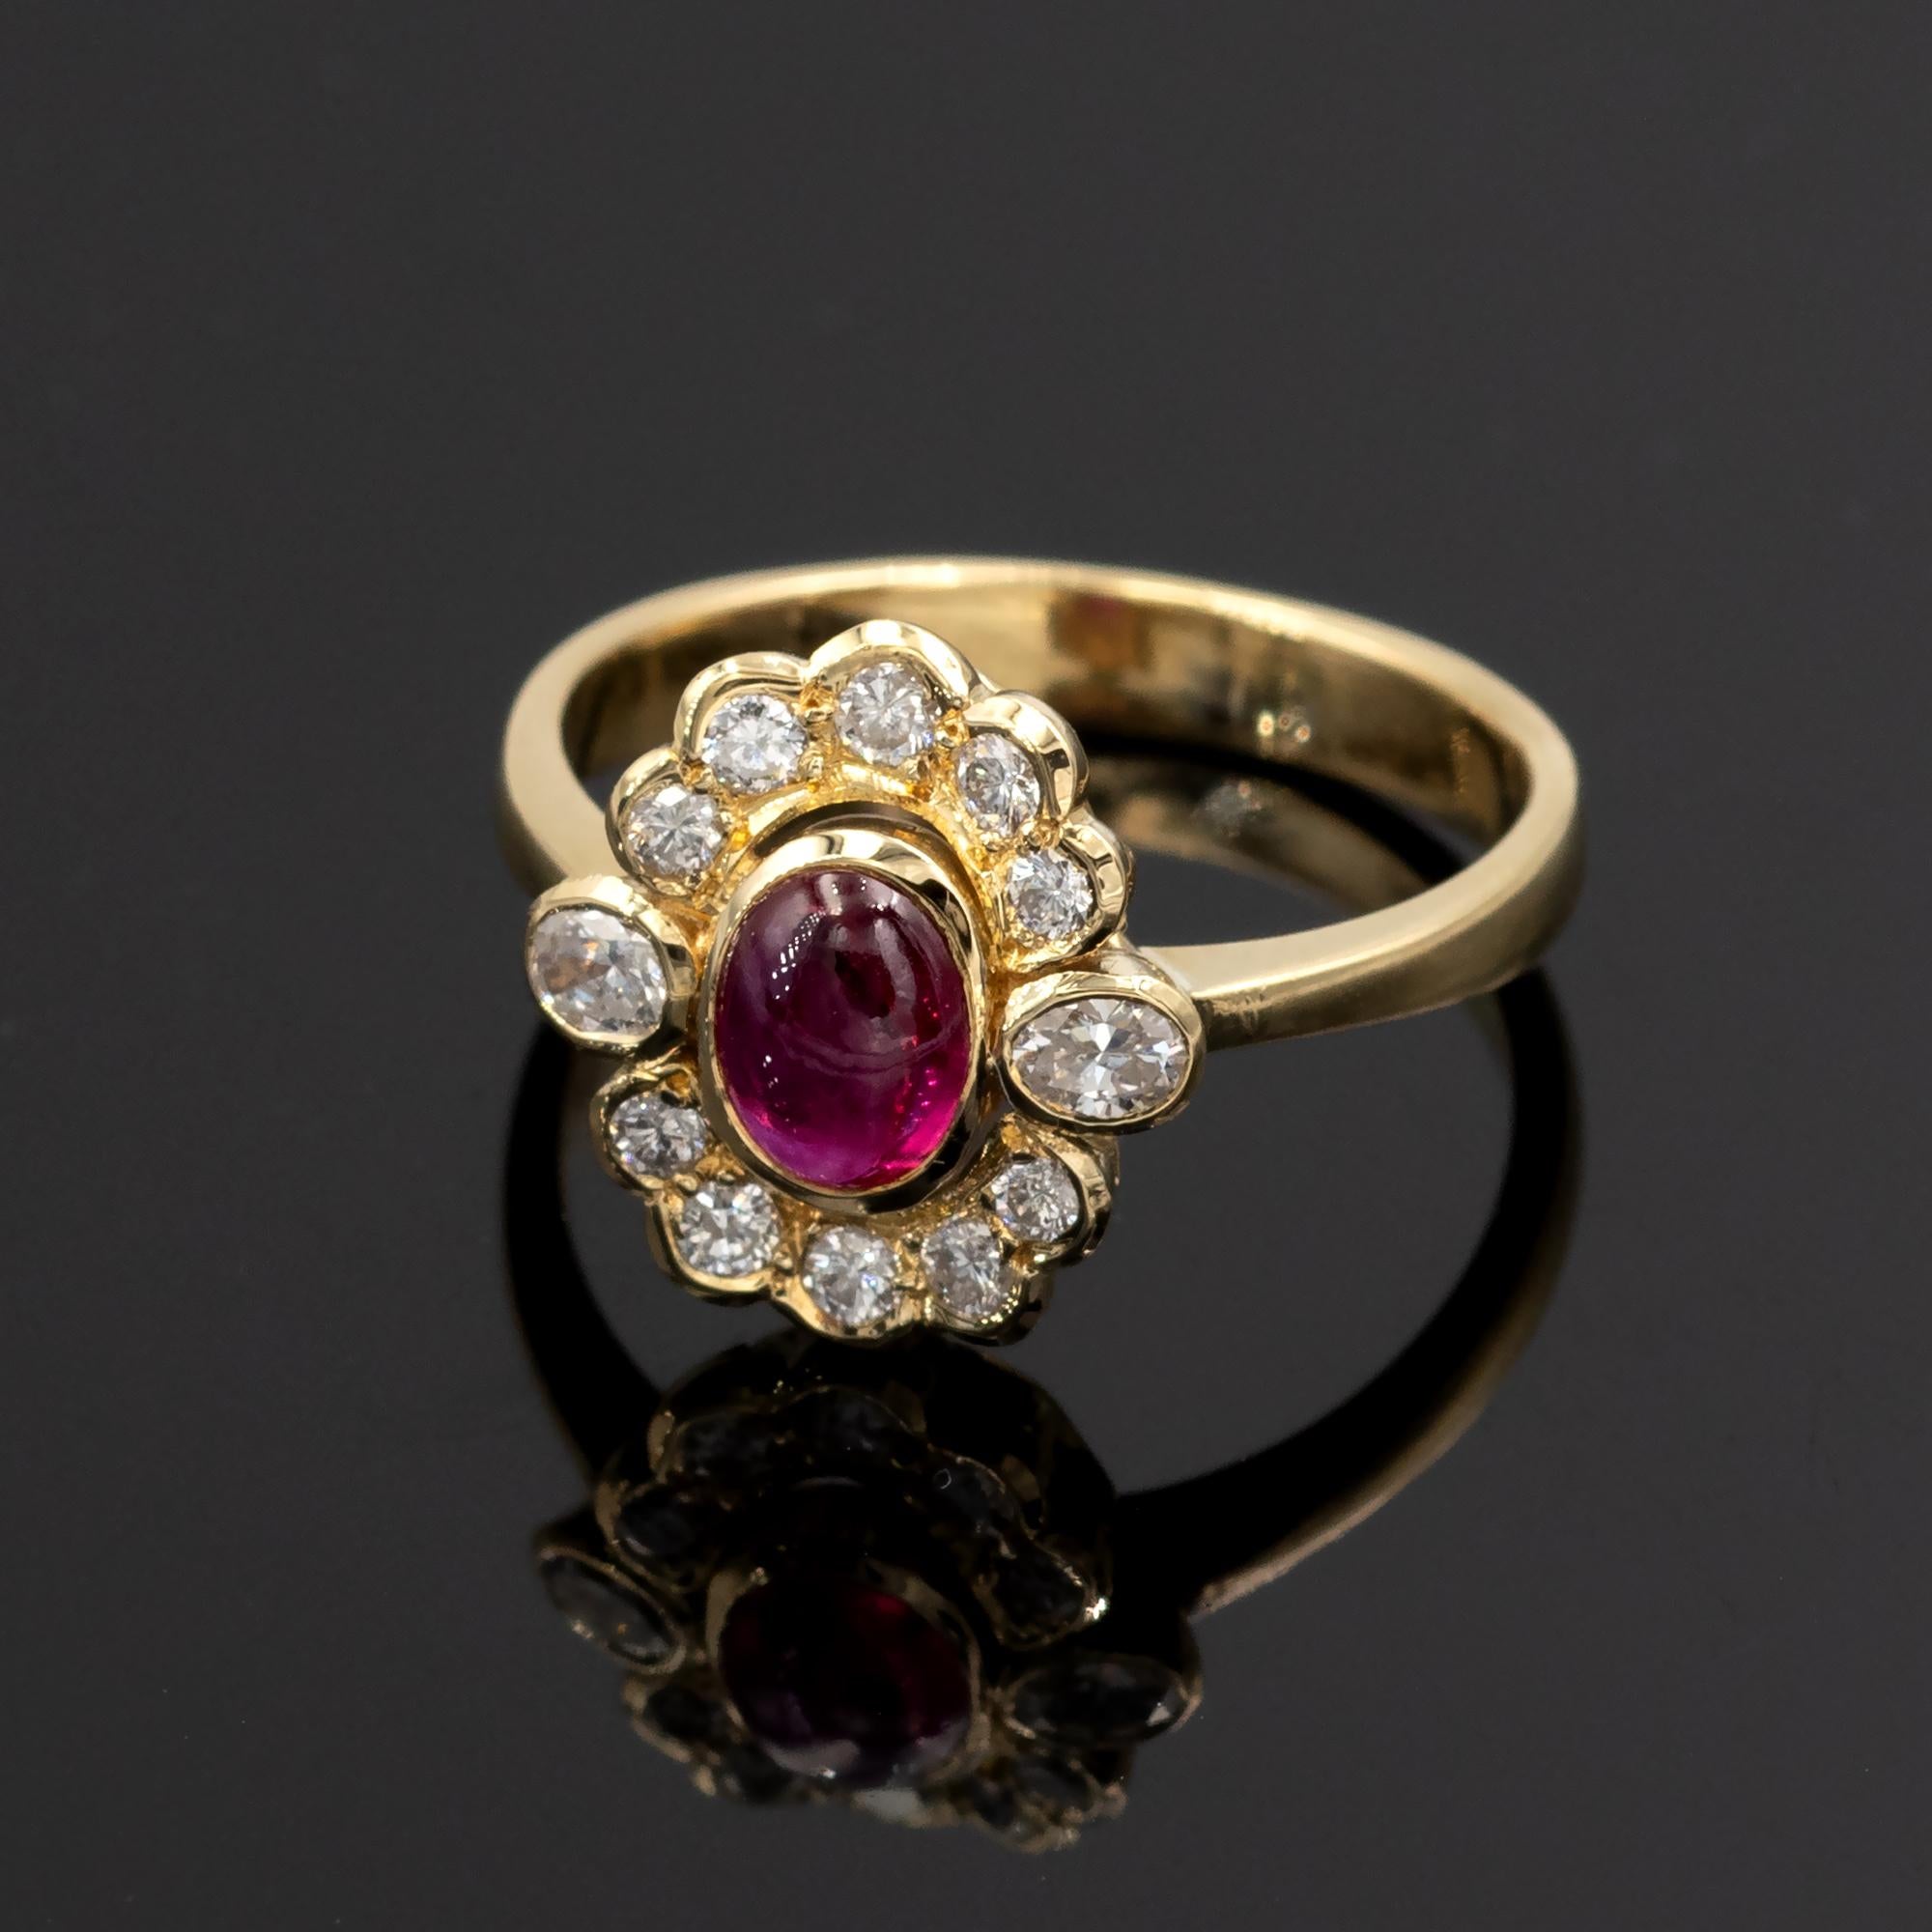 Graceful flower like halo ring showcasing a lively cabochon ruby surrounded by oval and round brilliant cut diamonds ( approx 0.4ct FG VS). The ring is in plain 18 karat yellow gold.
the head is 12.7 x 11.8 mm